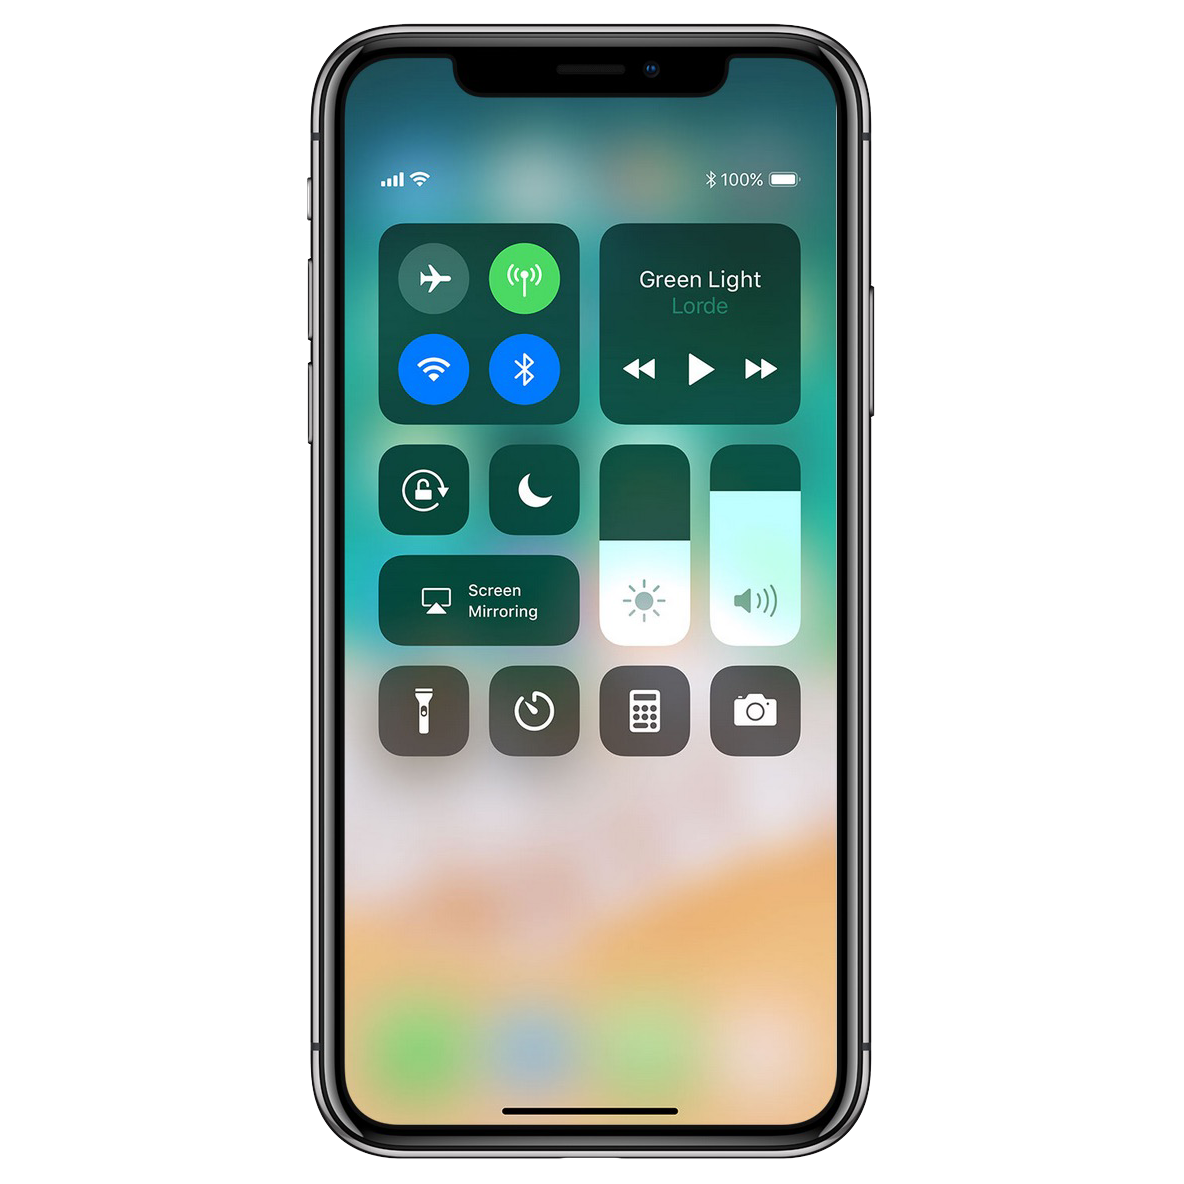 EFF Says iOS 11 Wi-Fi and Bluetooth Toggles Are Misleading and Compromise User Security